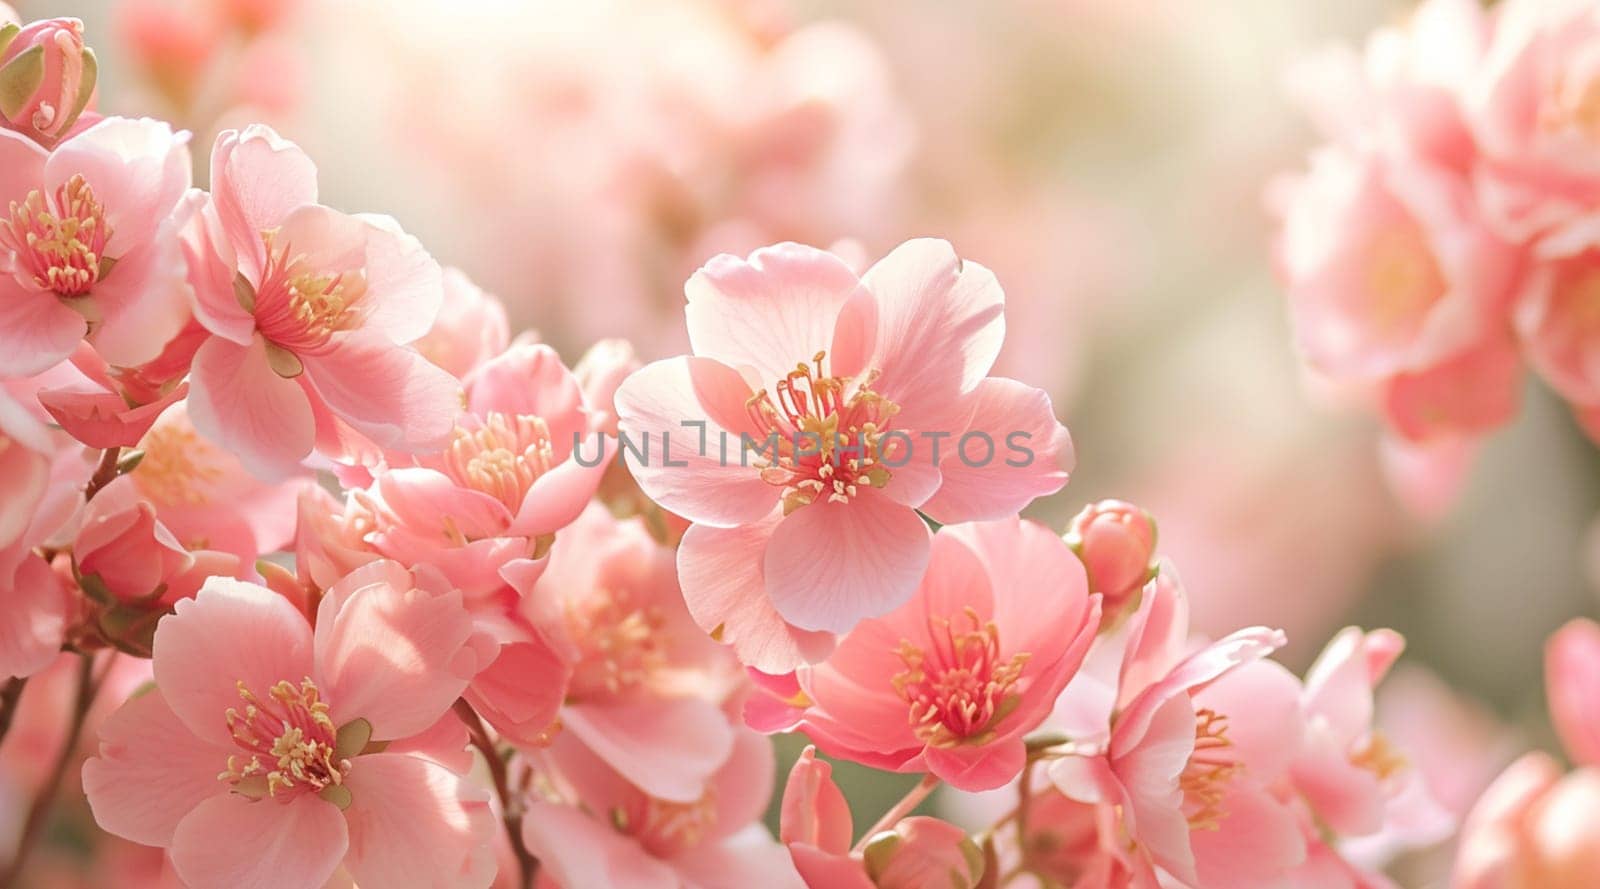 Pink cherry blossoms in full bloom, bathed in soft sunlight. High quality photo